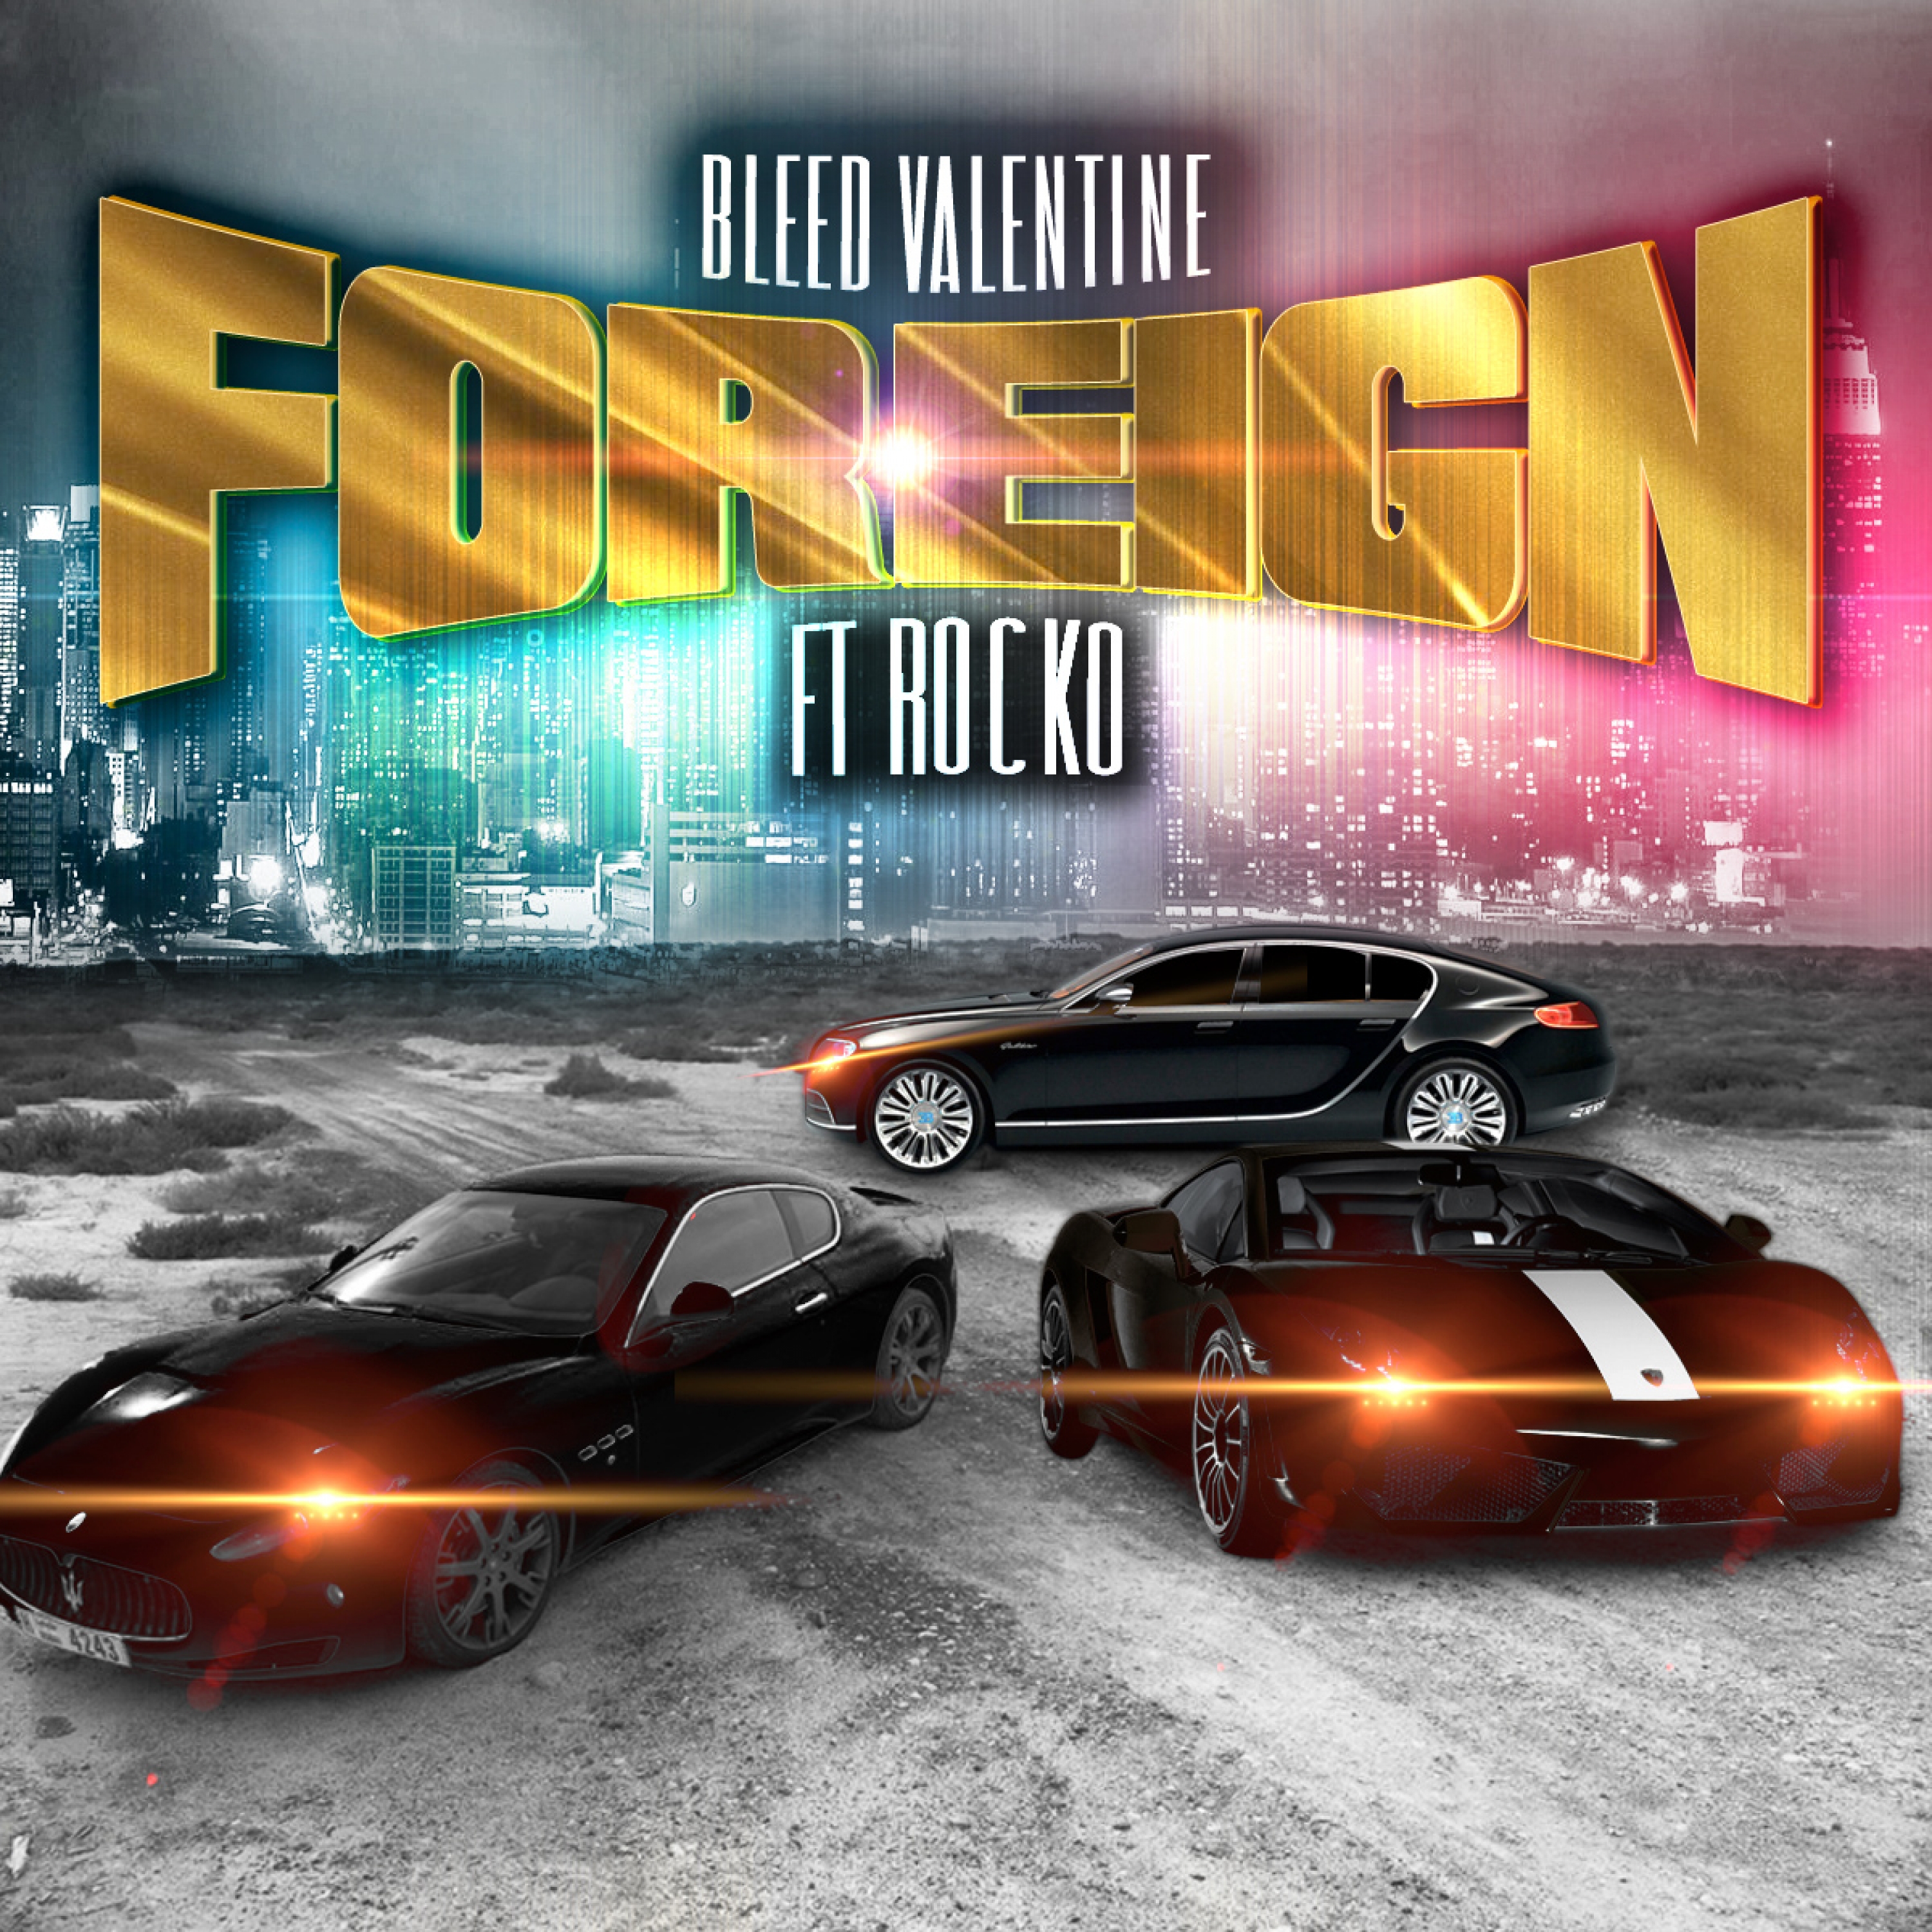 Foreign (feat. Rocko) - Single